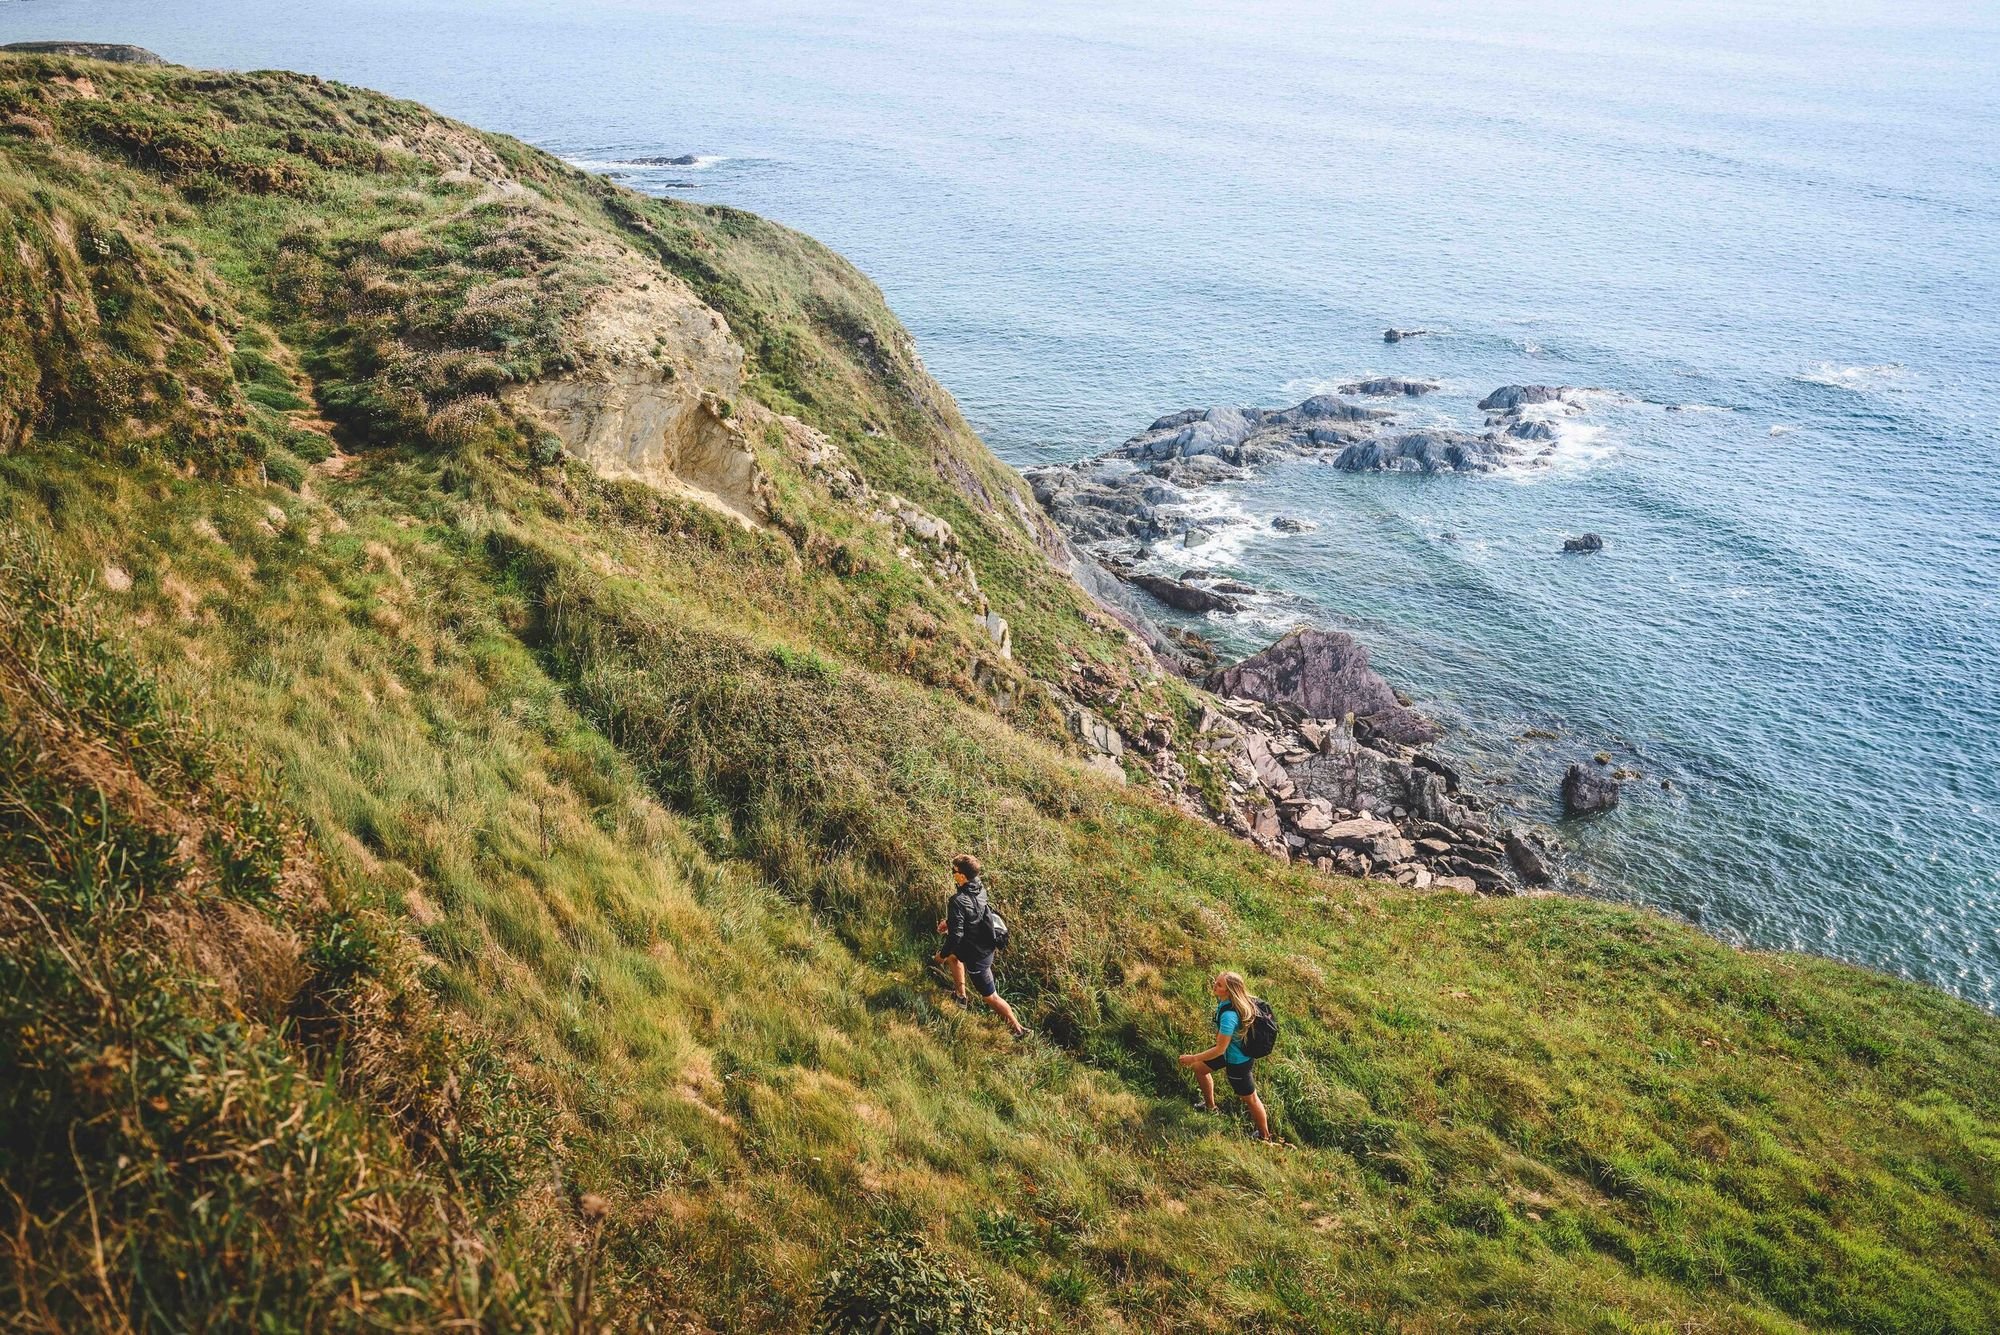 Two hikers on the coastal path.